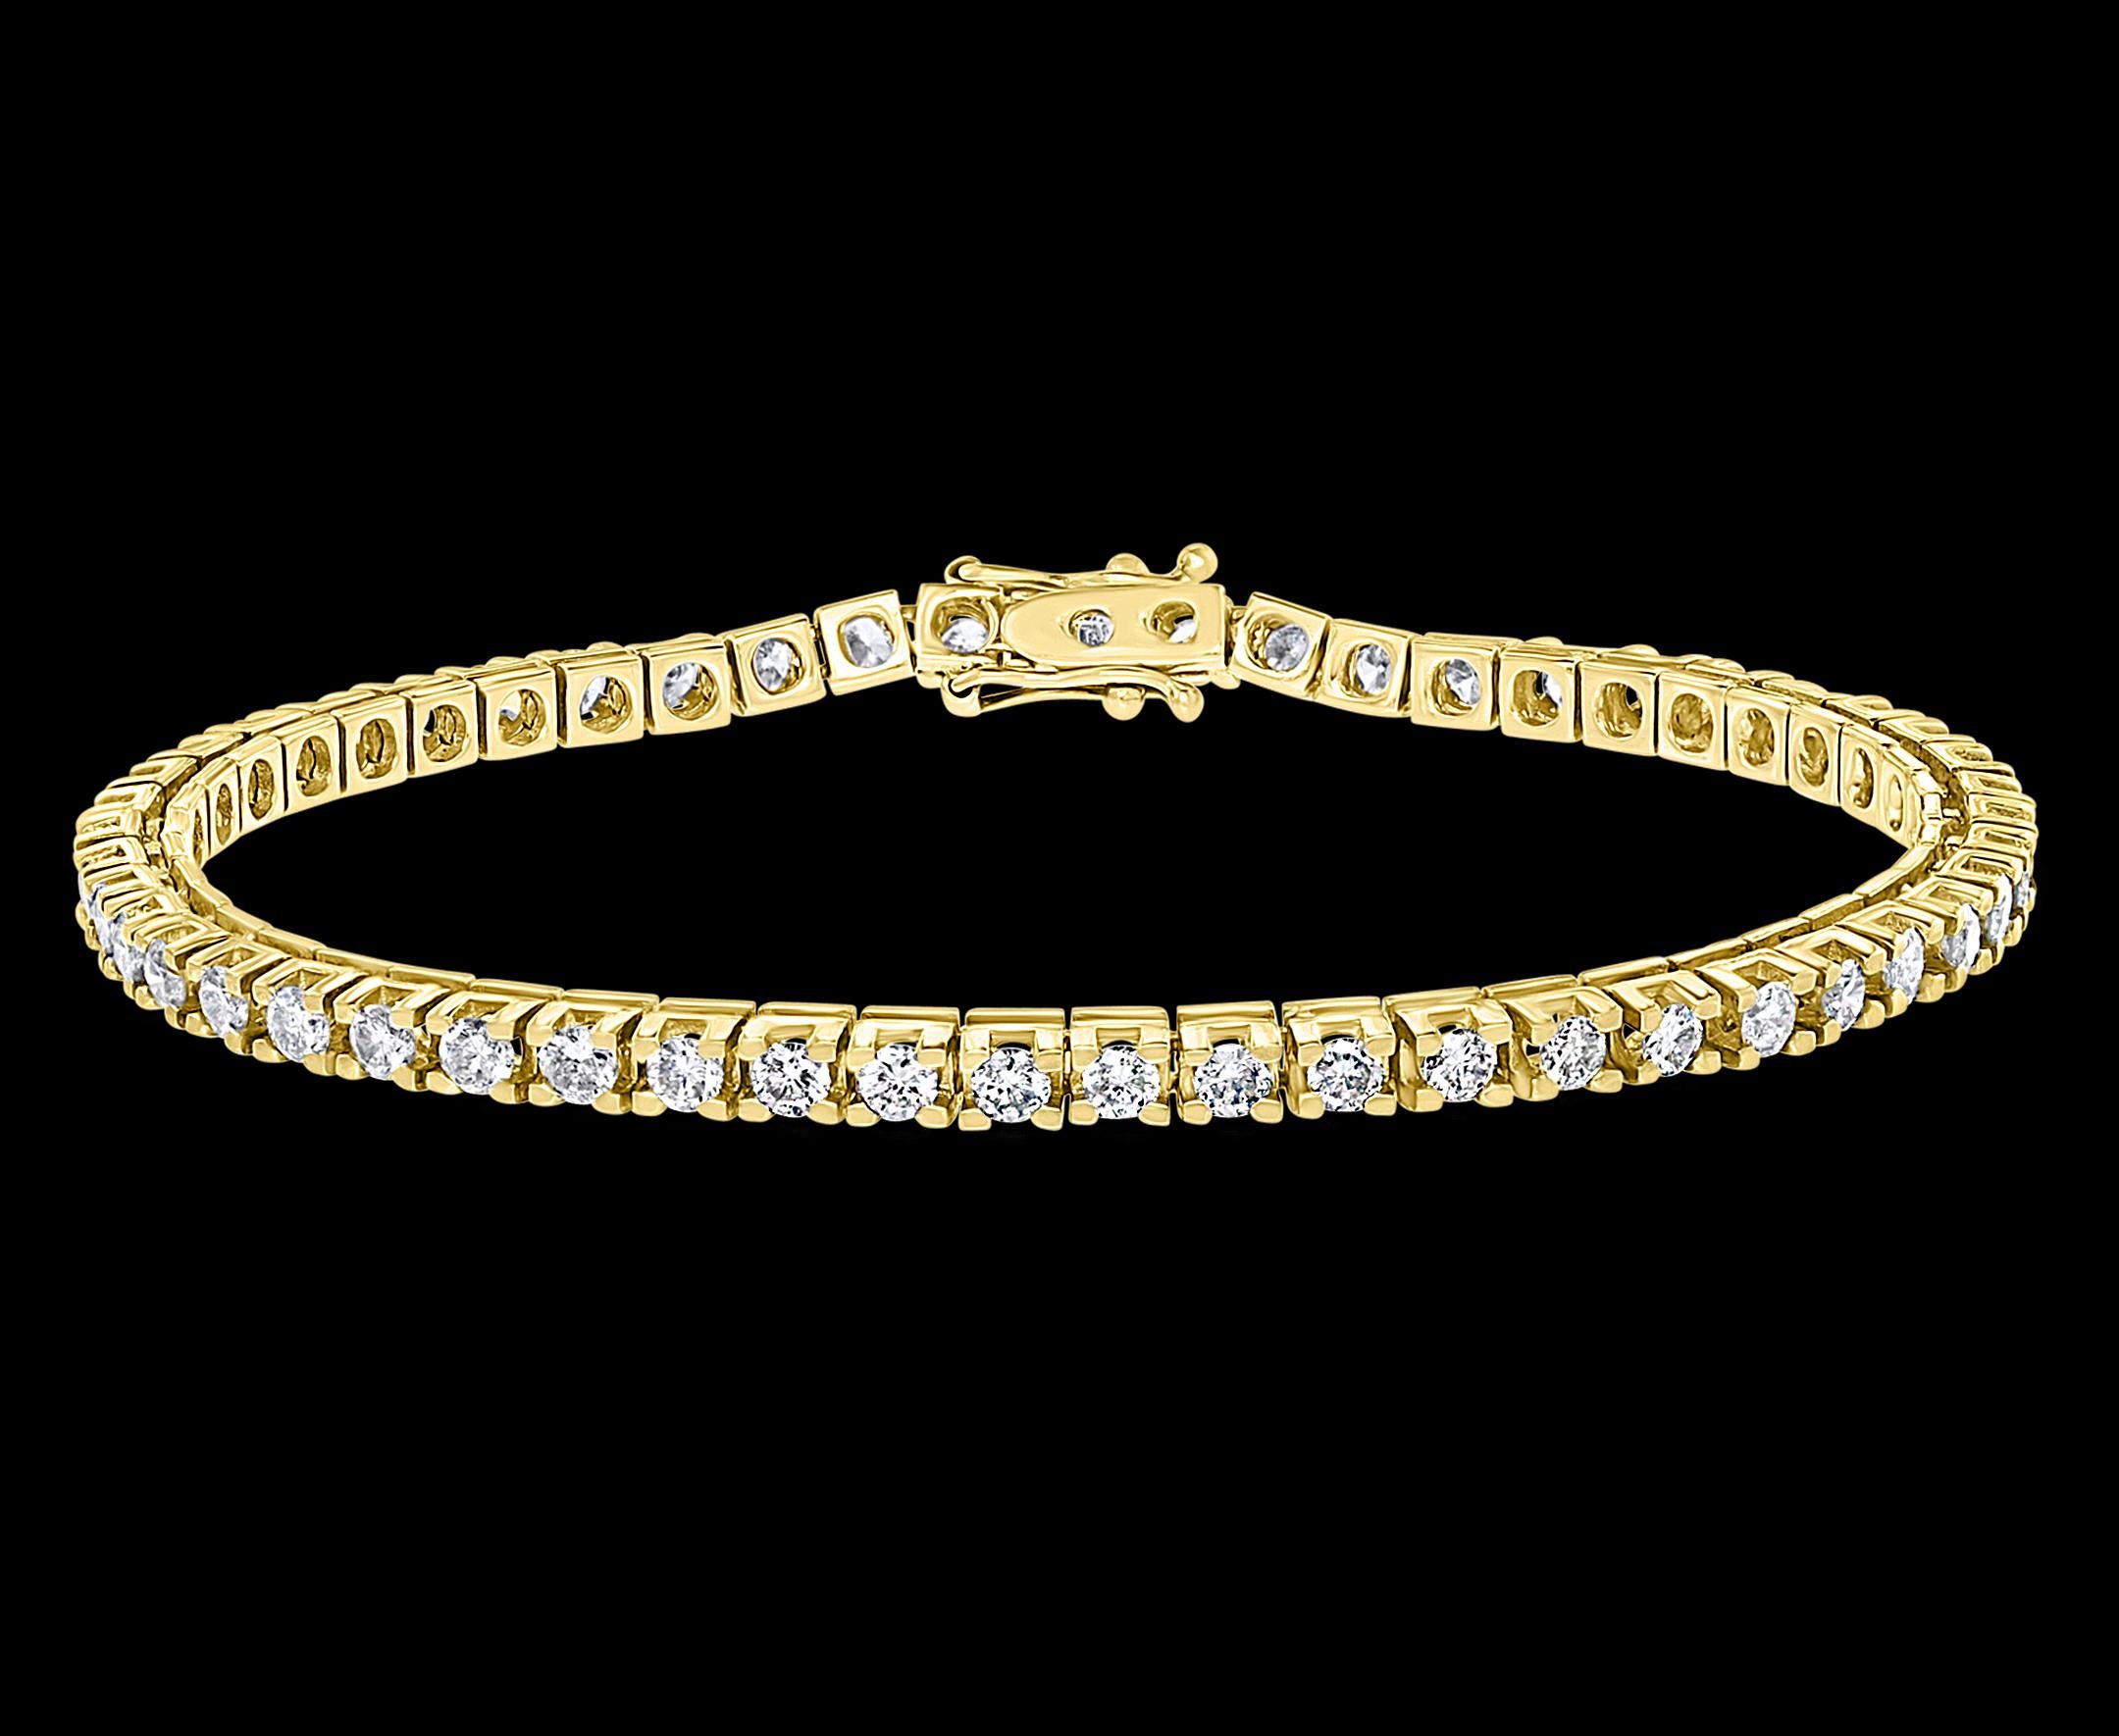 Meet the ultimate bold tennis bracelet. The single row of prong set Round Brilliant cut
Total Diamond  weighs Approximately  3.85 total carats. That's enough to draw all eyes and add glamour to any occasion. The clasp is with two safety catch  ,very